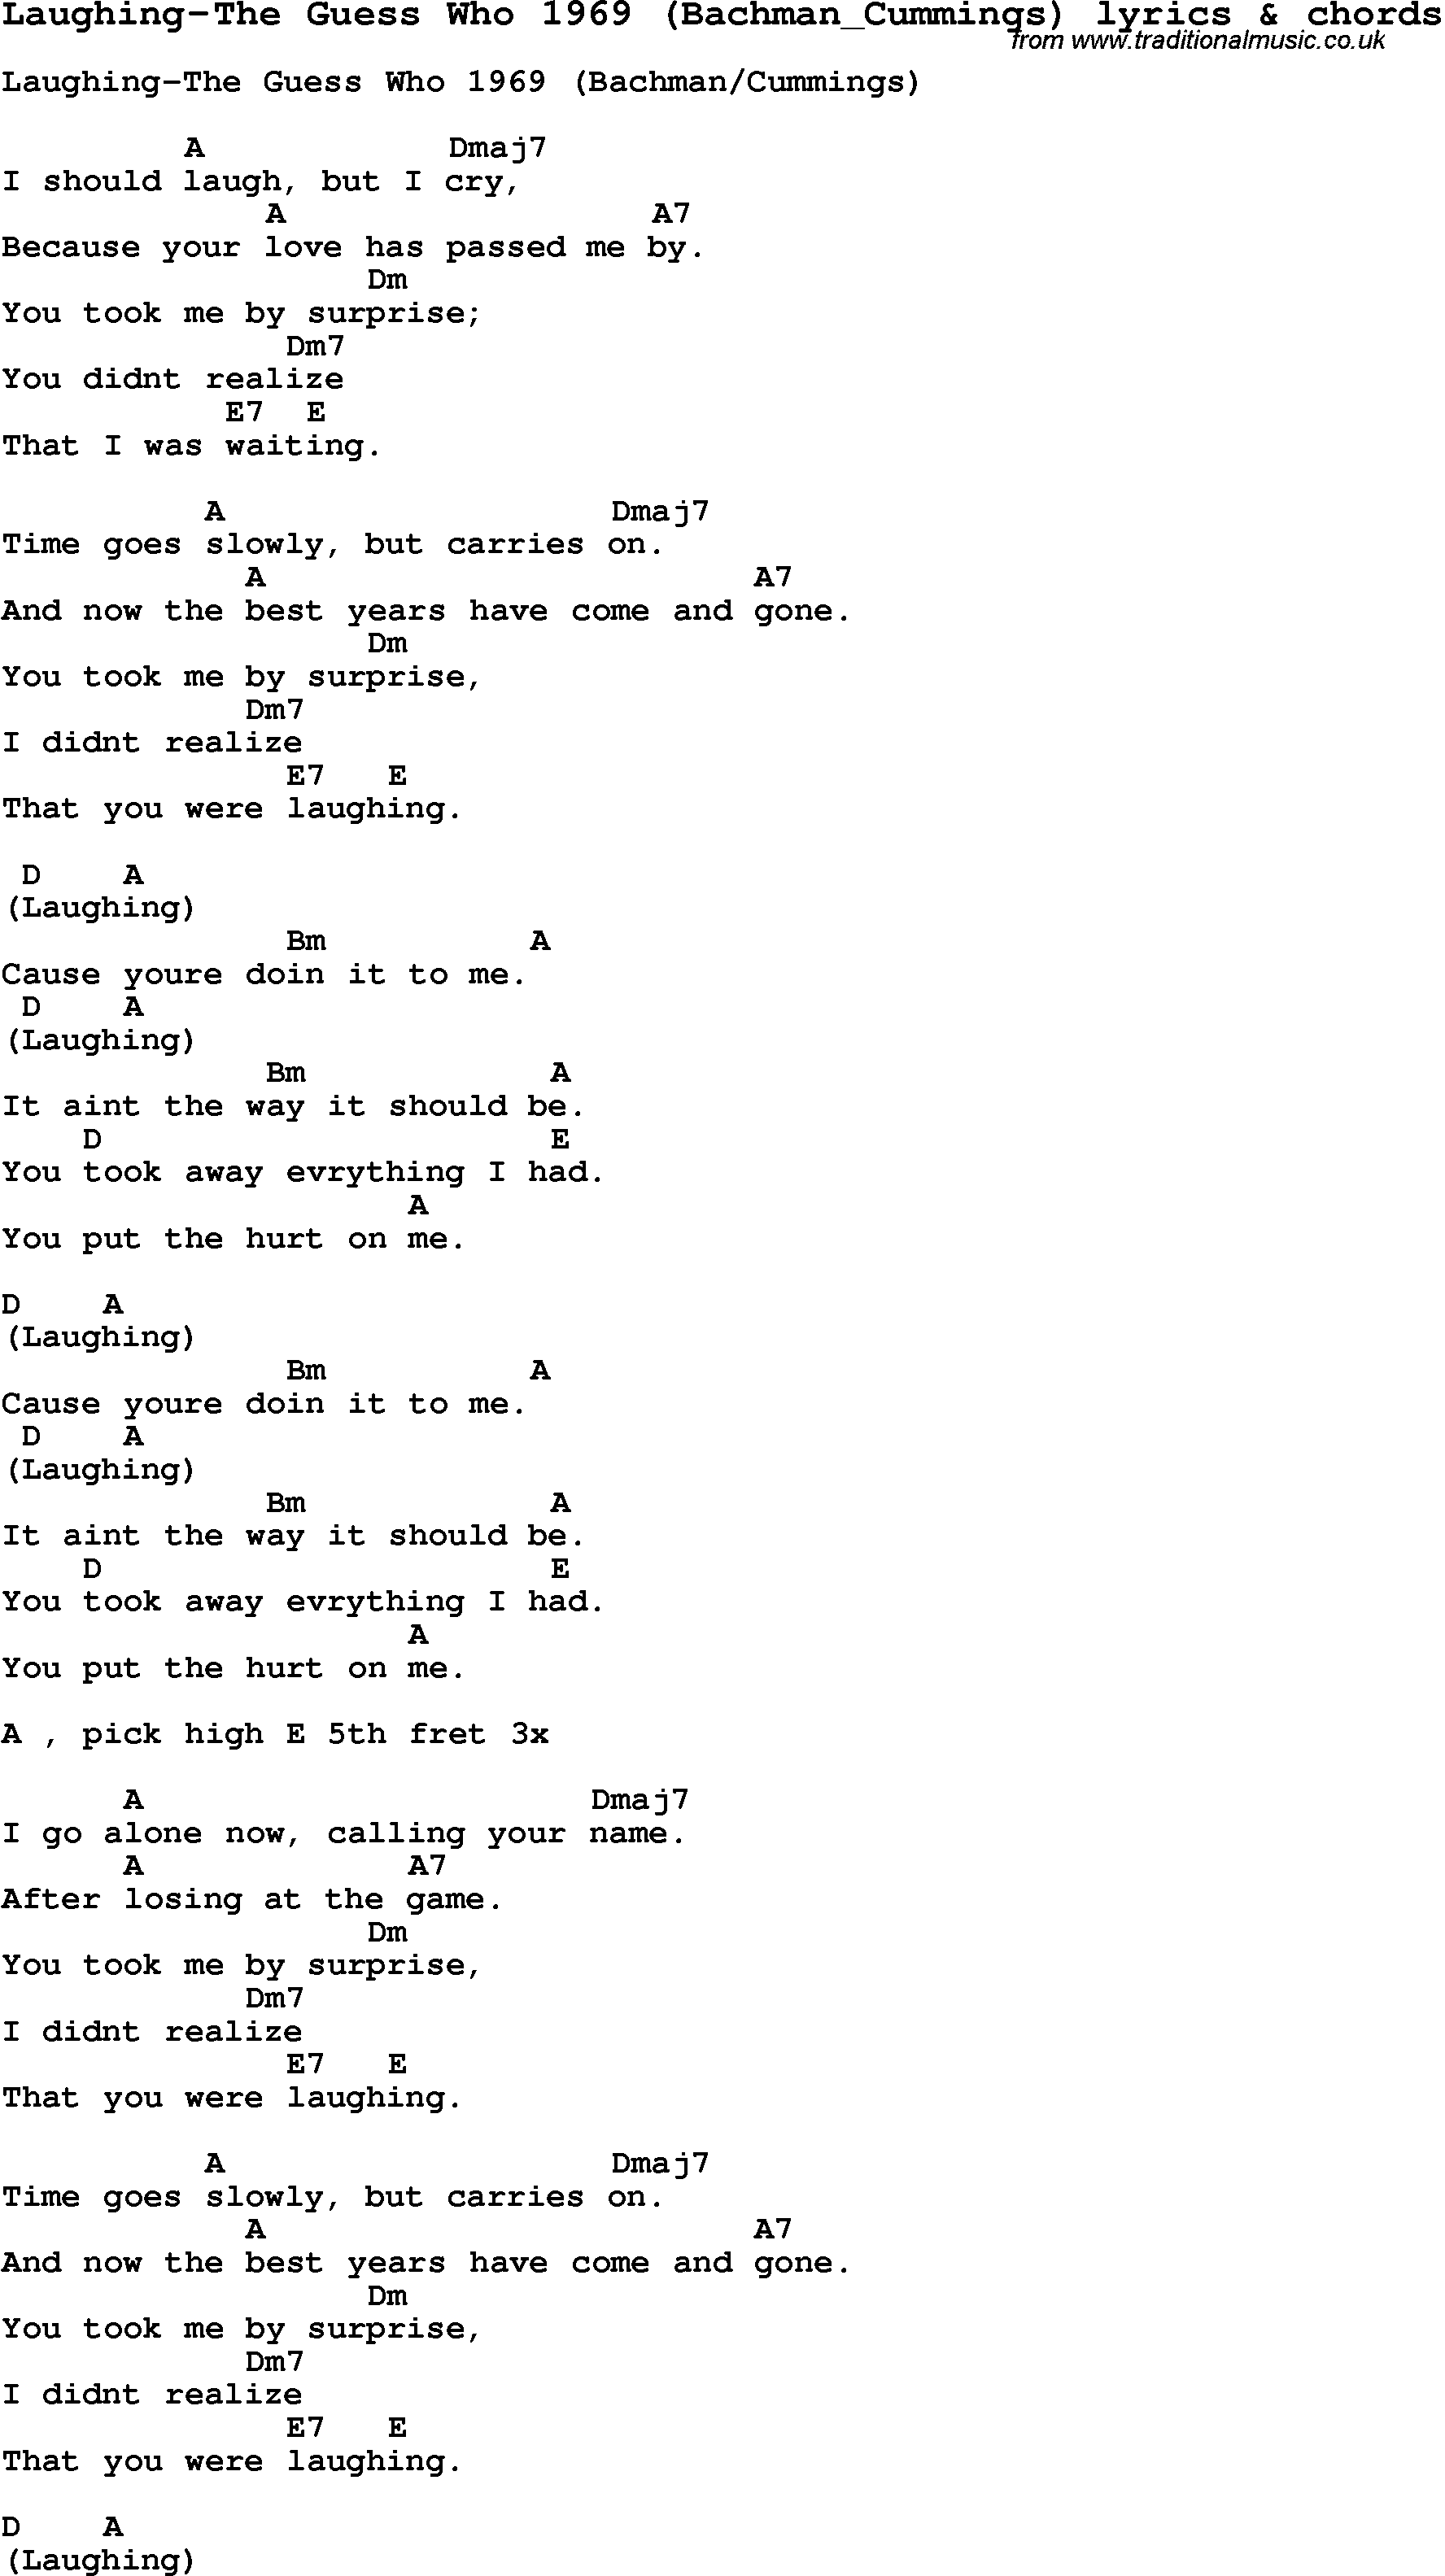 Love Song Lyrics for: Laughing-The Guess Who 1969 (Bachman_Cummings) with chords for Ukulele, Guitar Banjo etc.